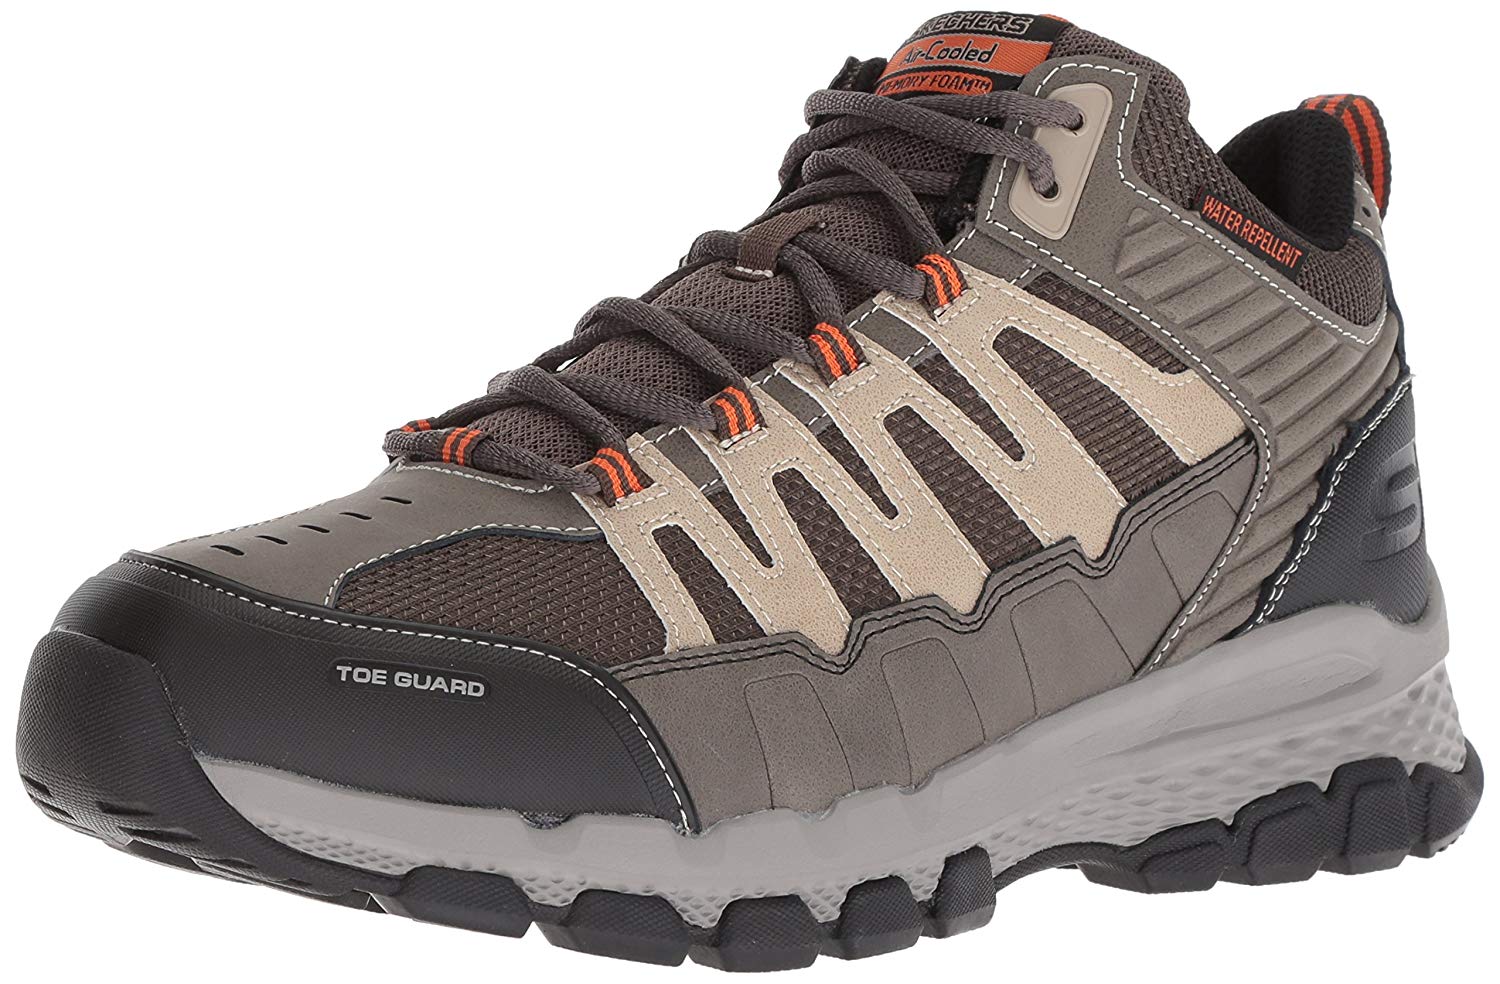 Skechers Men's Outland 2.0 Girvin Hiking Boot, Brown/Taupe, Size 12.0 ...